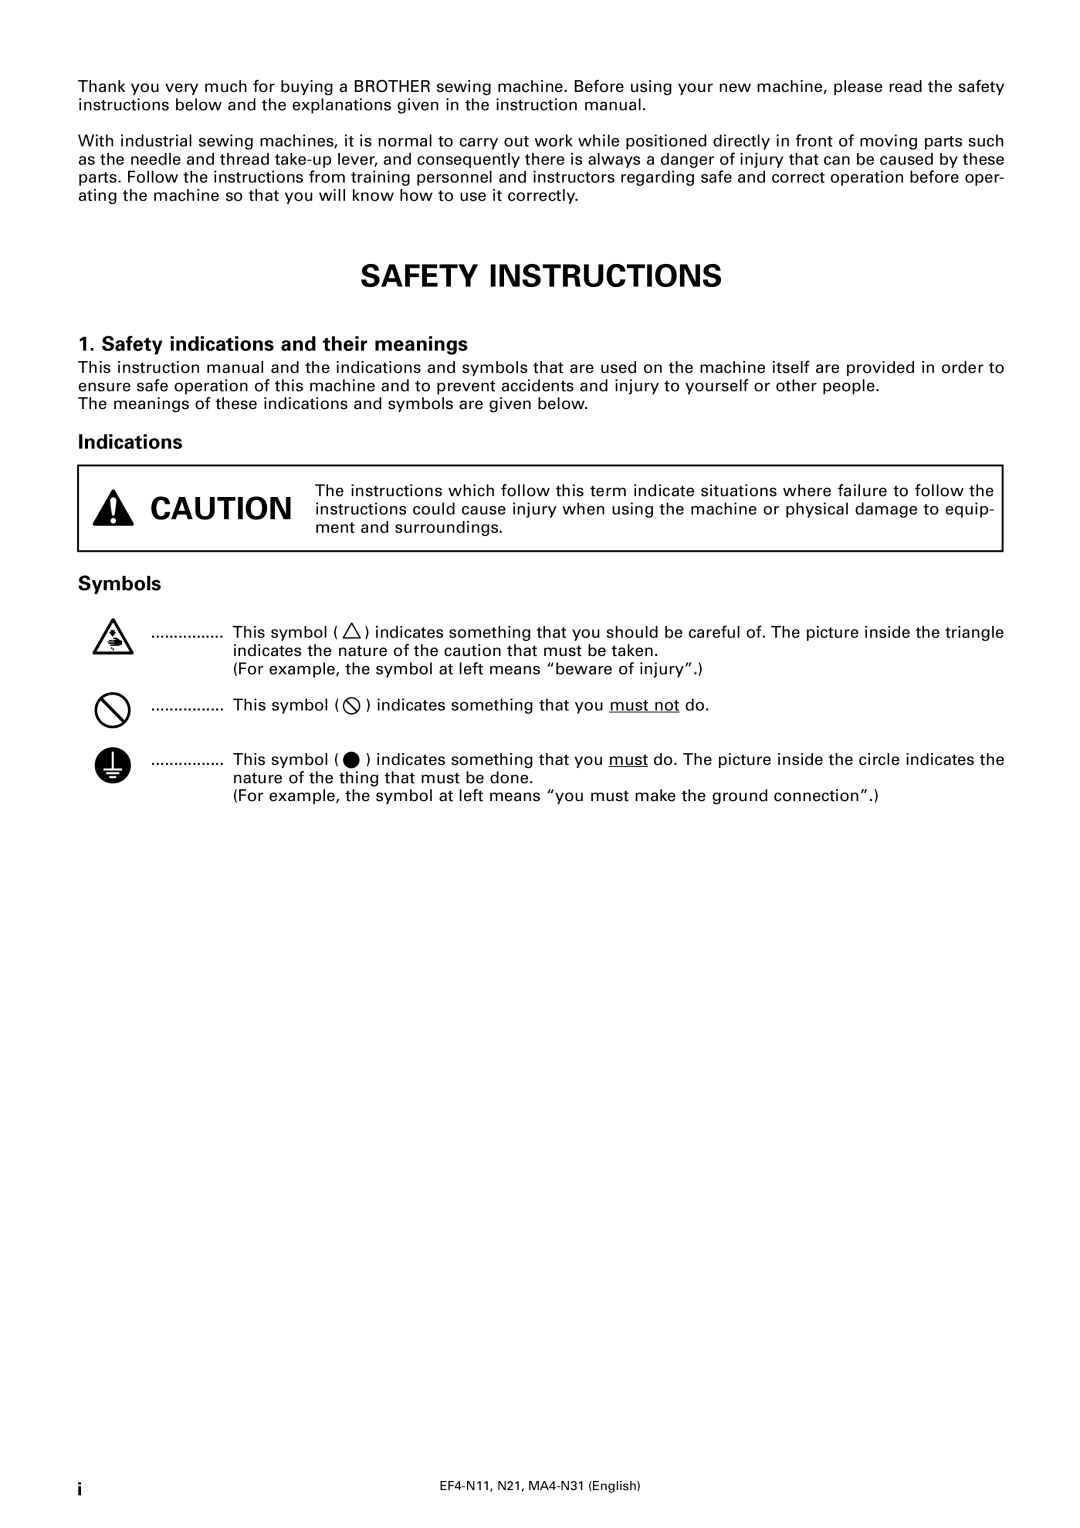 Brother MA4-N31, EF4-N21, EF4-N11 Safety Instructions, Safety indications and their meanings, Indications, Symbols 